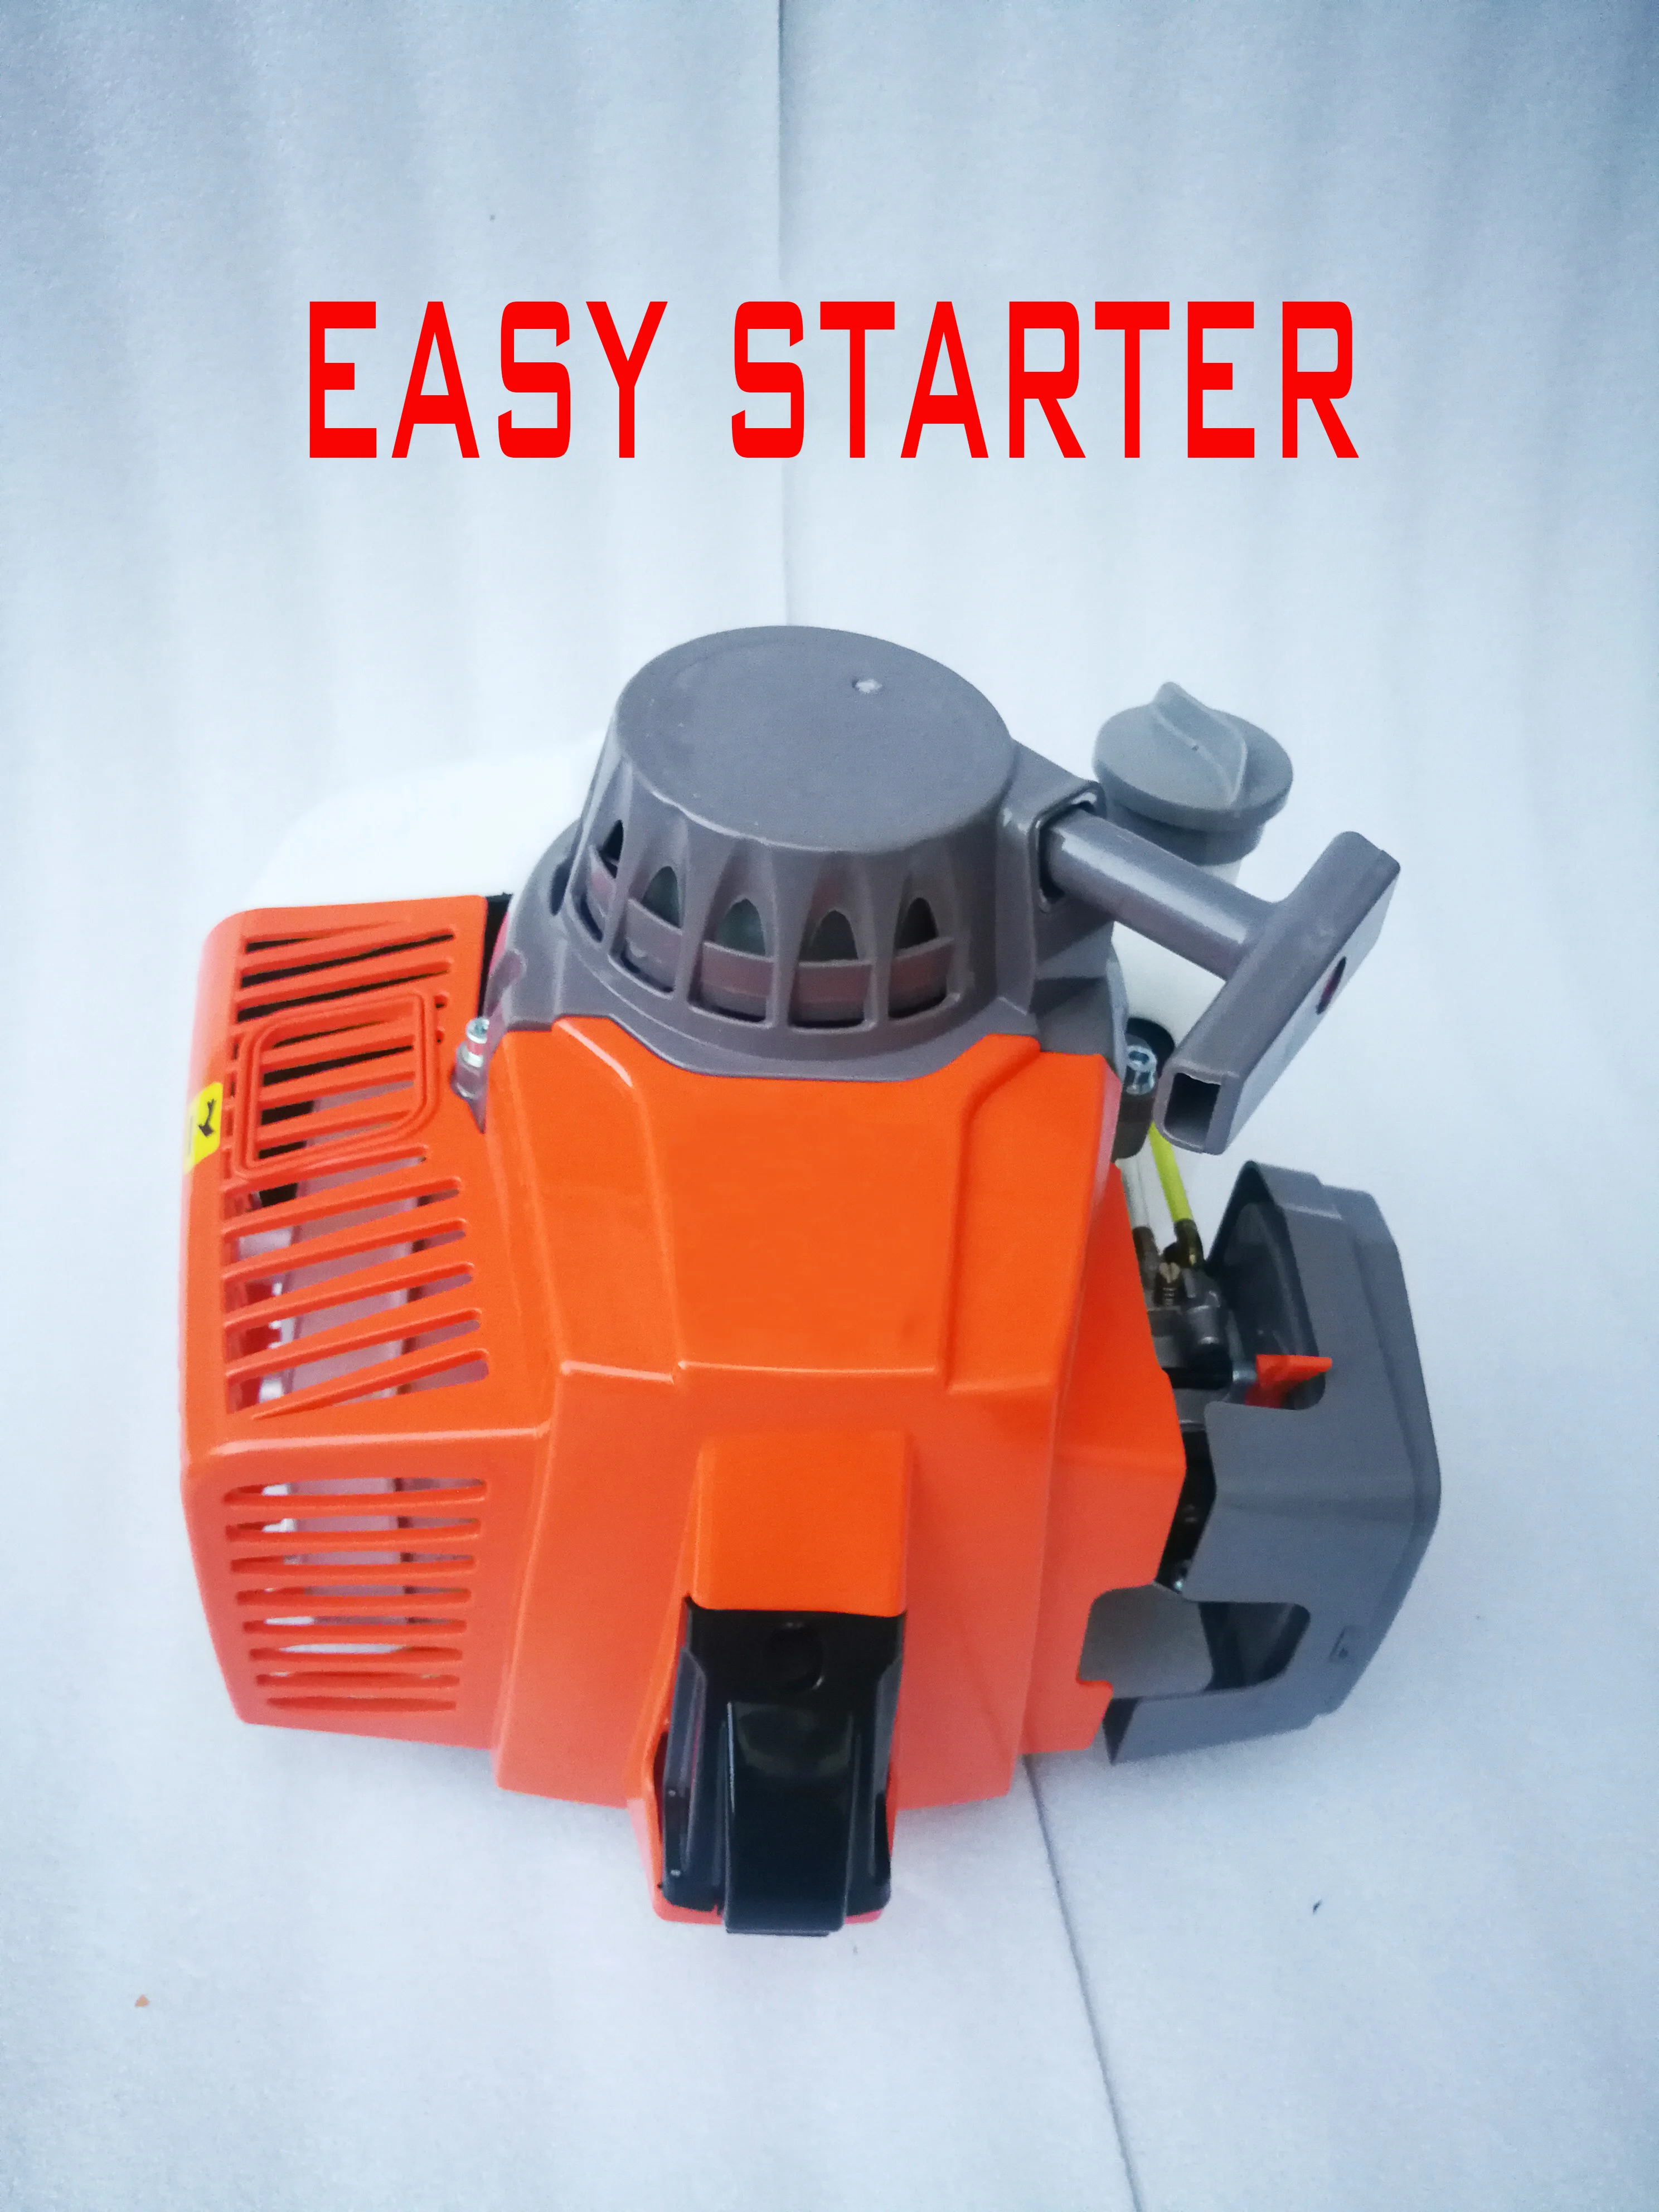 80CC Engine 2T Motor Petrol Brush Cutter Auger Scooter Motorbike Outboard Hugh Power Not 71cc 63cc Goped Big Bore 53mm enlarge